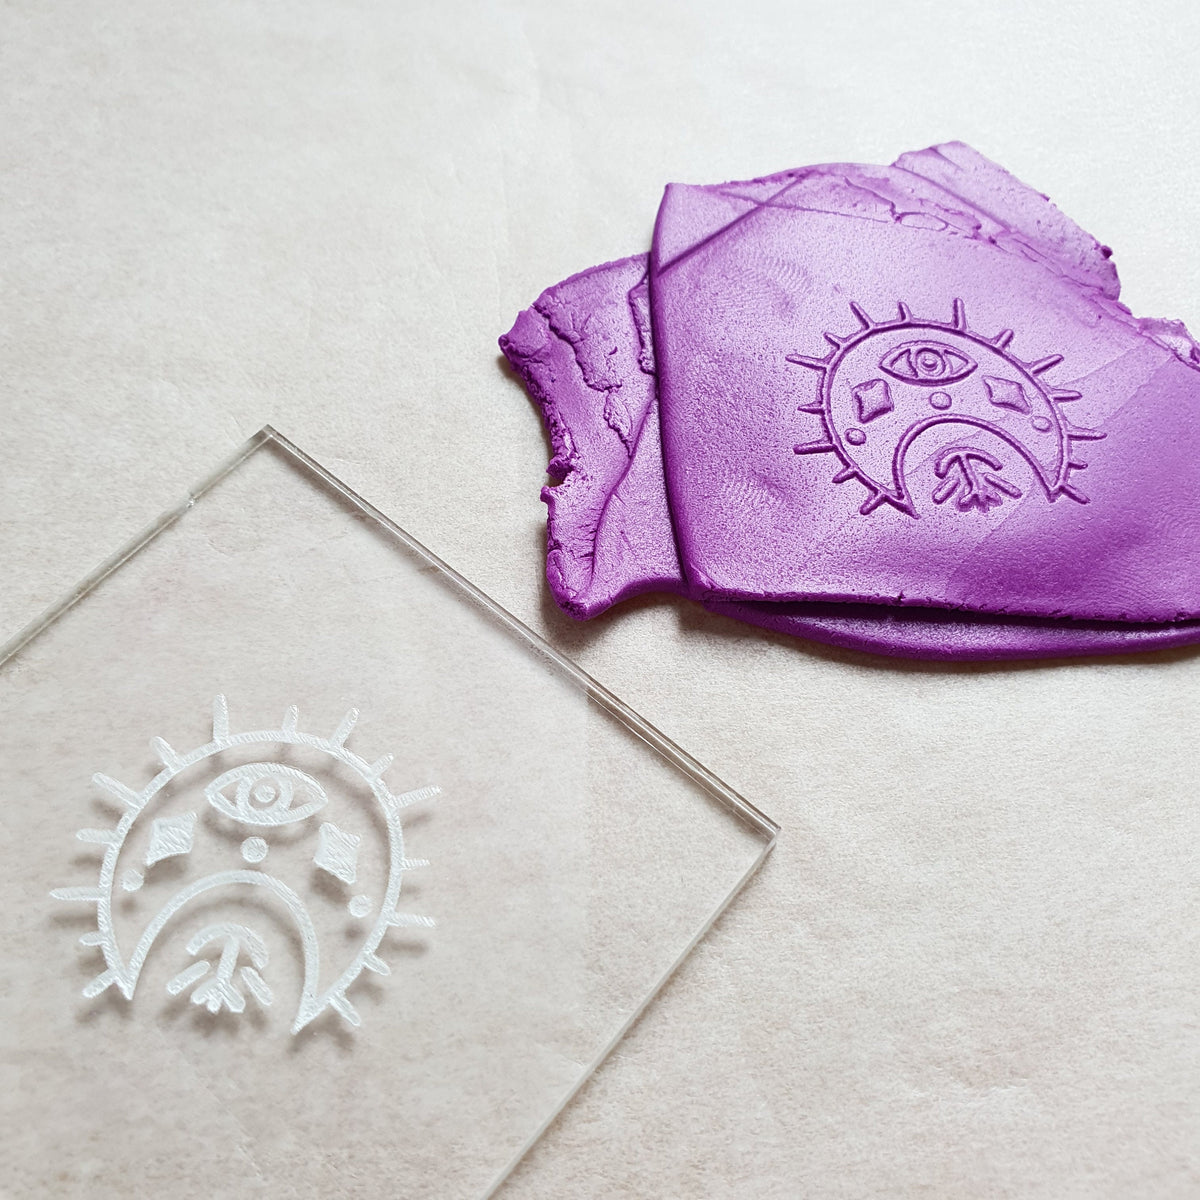 Embossing stamp for polymer clay Magic Moon texture plate debossing stamp  Acrylic stamps